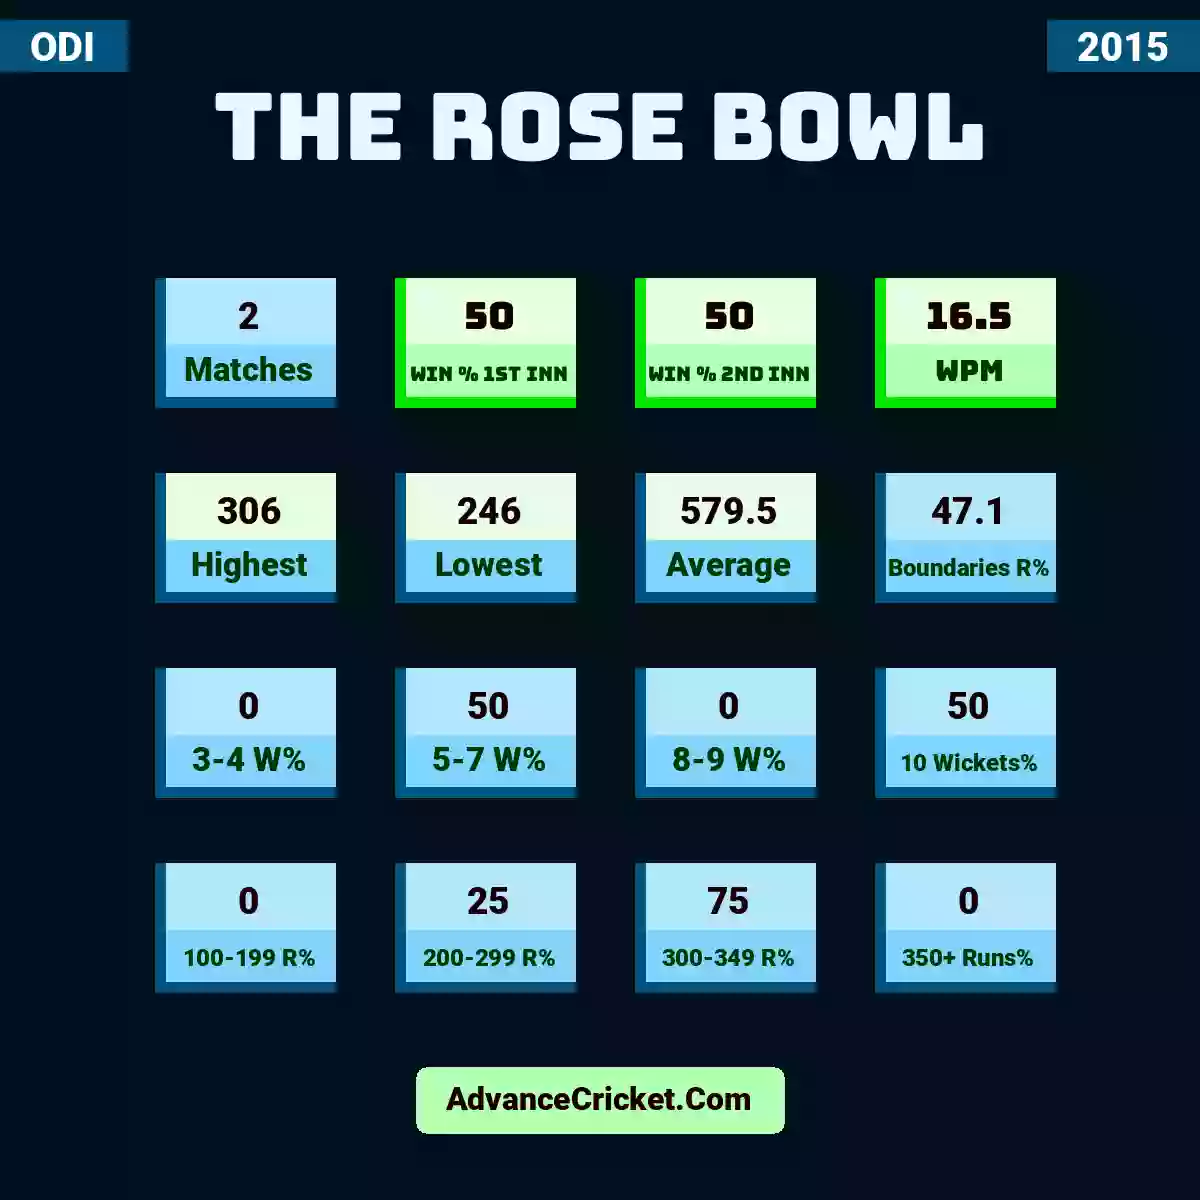 Image showing The Rose Bowl with Matches: 2, Win % 1st Inn: 50, Win % 2nd Inn: 50, WPM: 16.5, Highest: 306, Lowest: 246, Average: 579.5, Boundaries R%: 47.1, 3-4 W%: 0, 5-7 W%: 50, 8-9 W%: 0, 10 Wickets%: 50, 100-199 R%: 0, 200-299 R%: 25, 300-349 R%: 75, 350+ Runs%: 0.